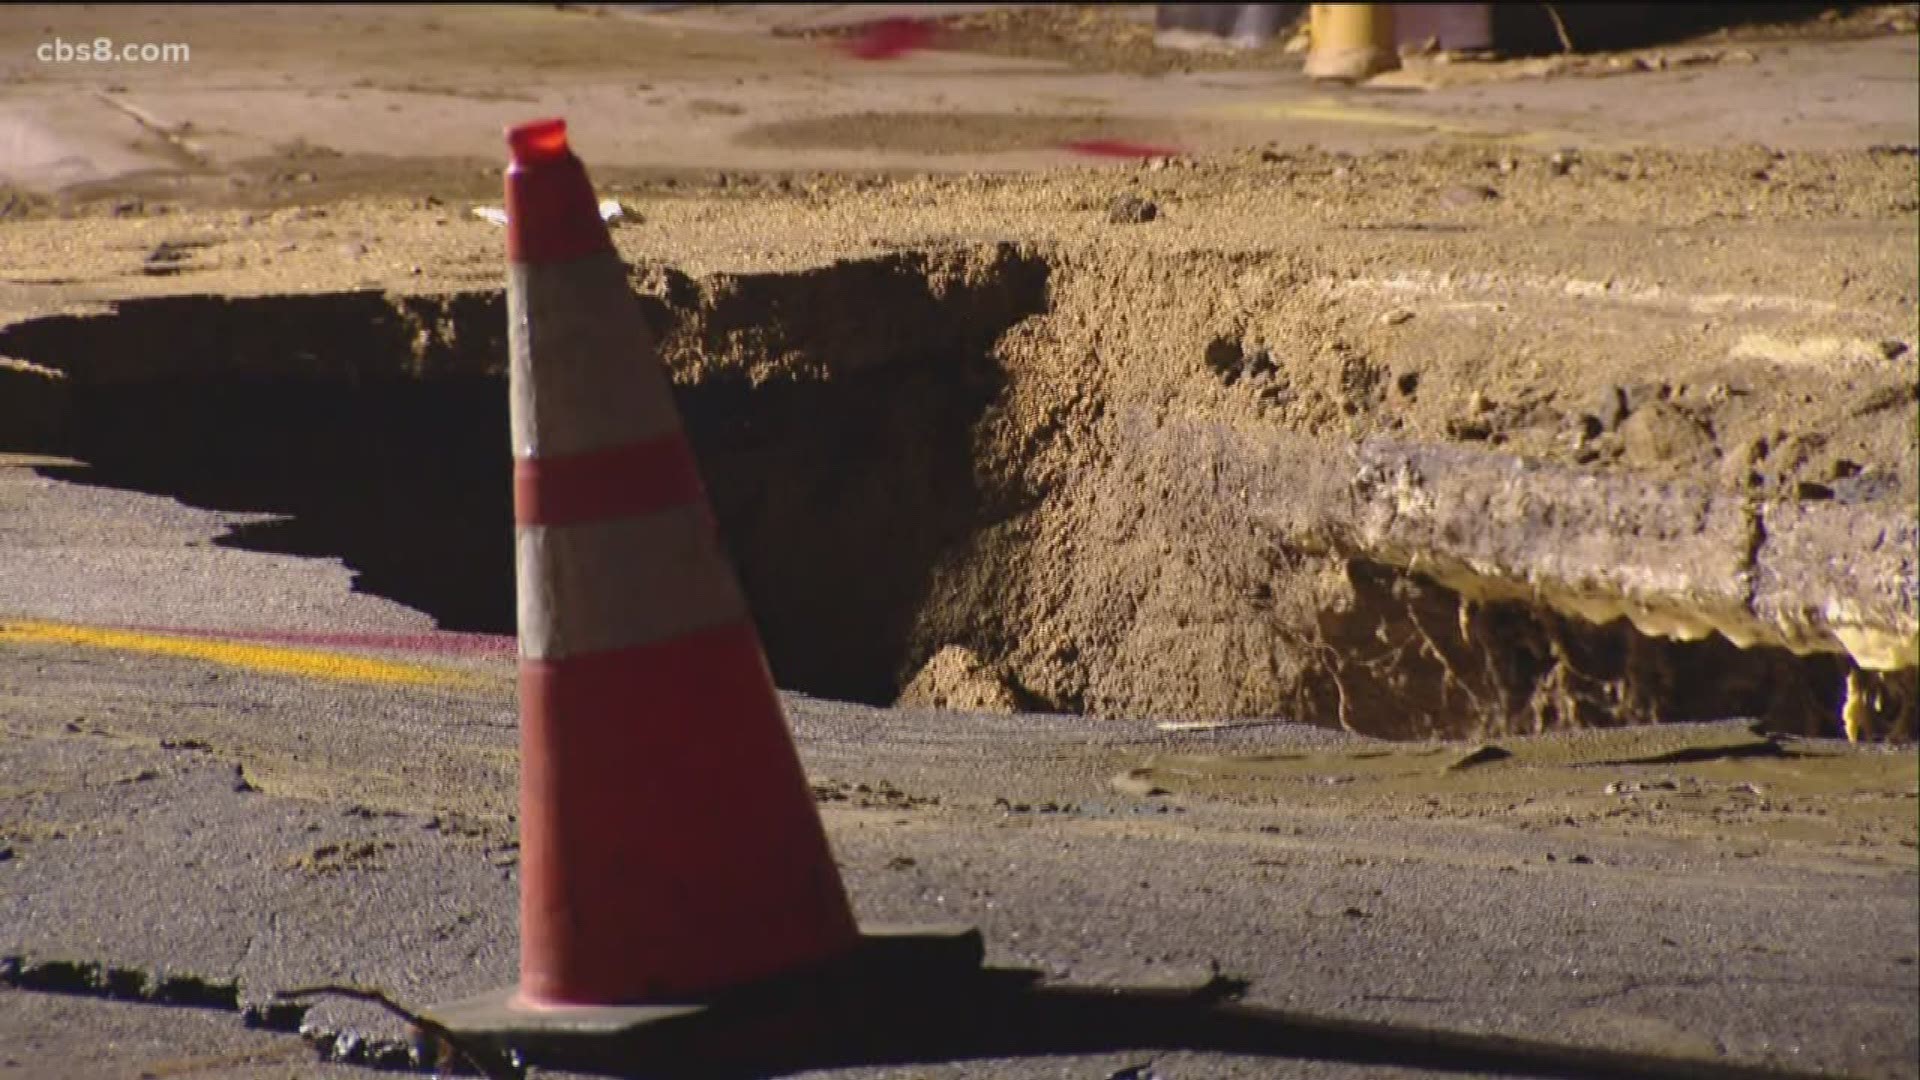 Officials said a 16-inch pipe near Cordial Rd. burst causing the water main break, leaving about 180 customers without water in the neighborhood.